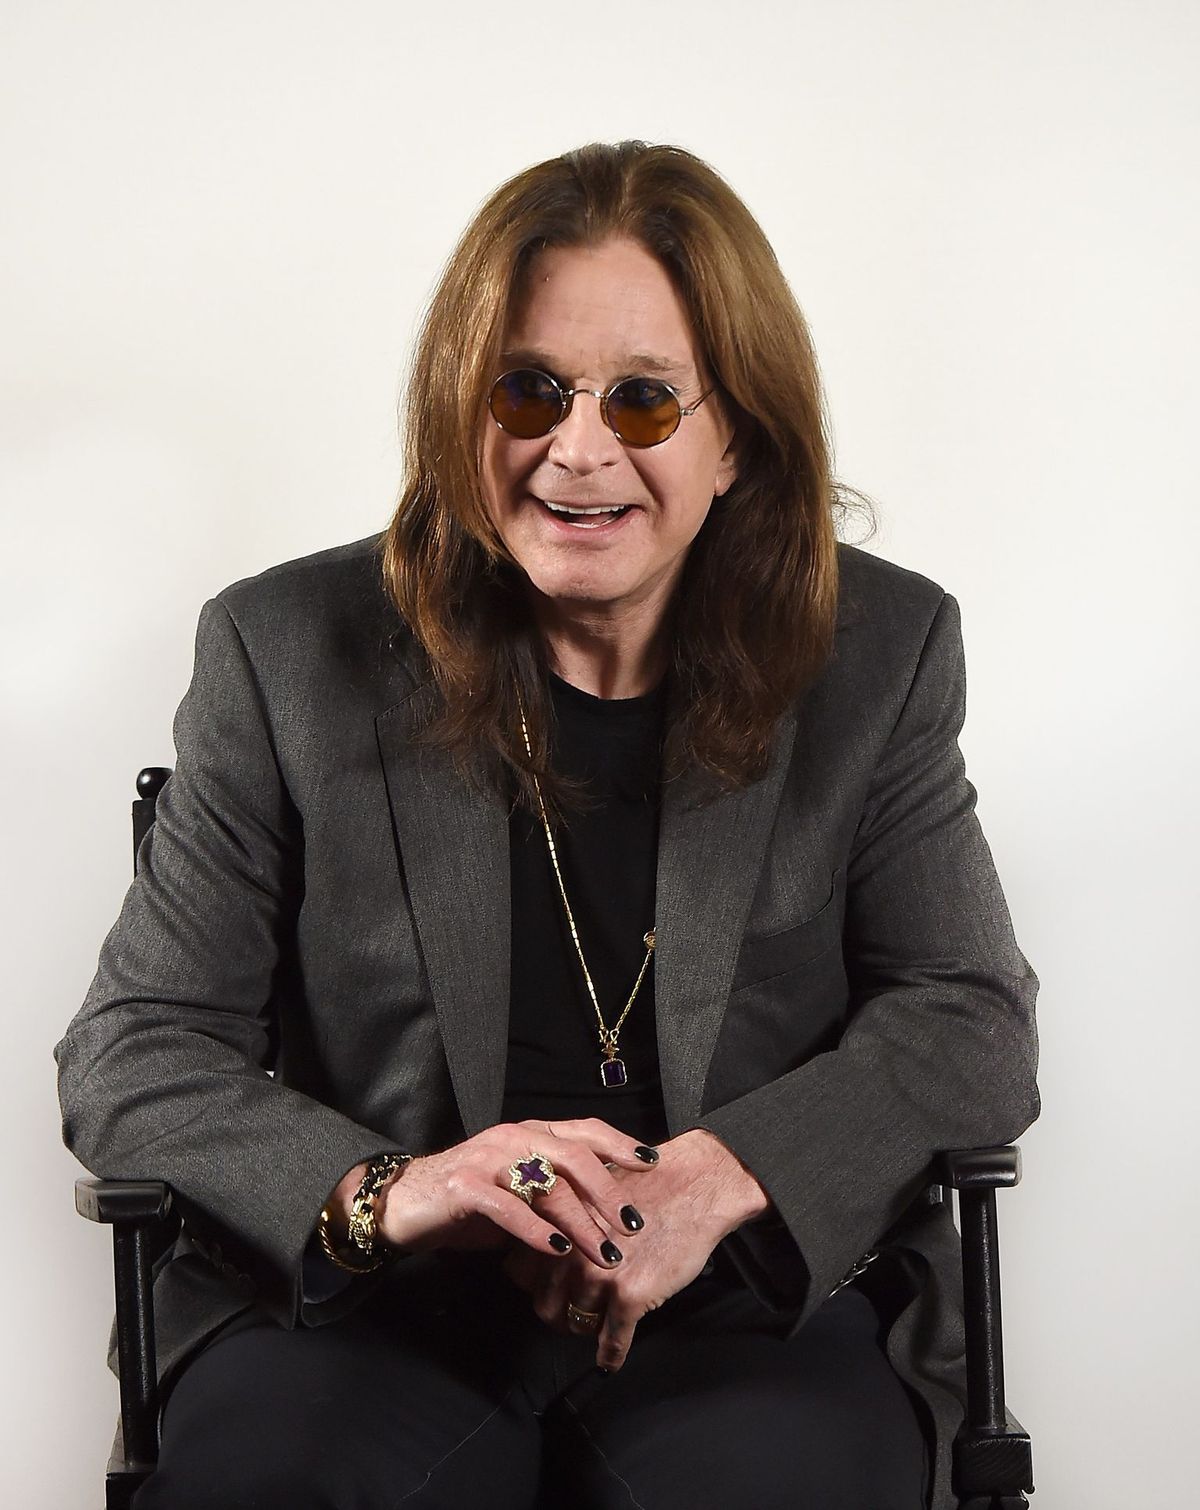 Ozzy Osbourne Announces "No More Tours 2" Final World Tour at Press Conference at his Los Angeles Home on February 6, 2018 | Photo: Getty Images